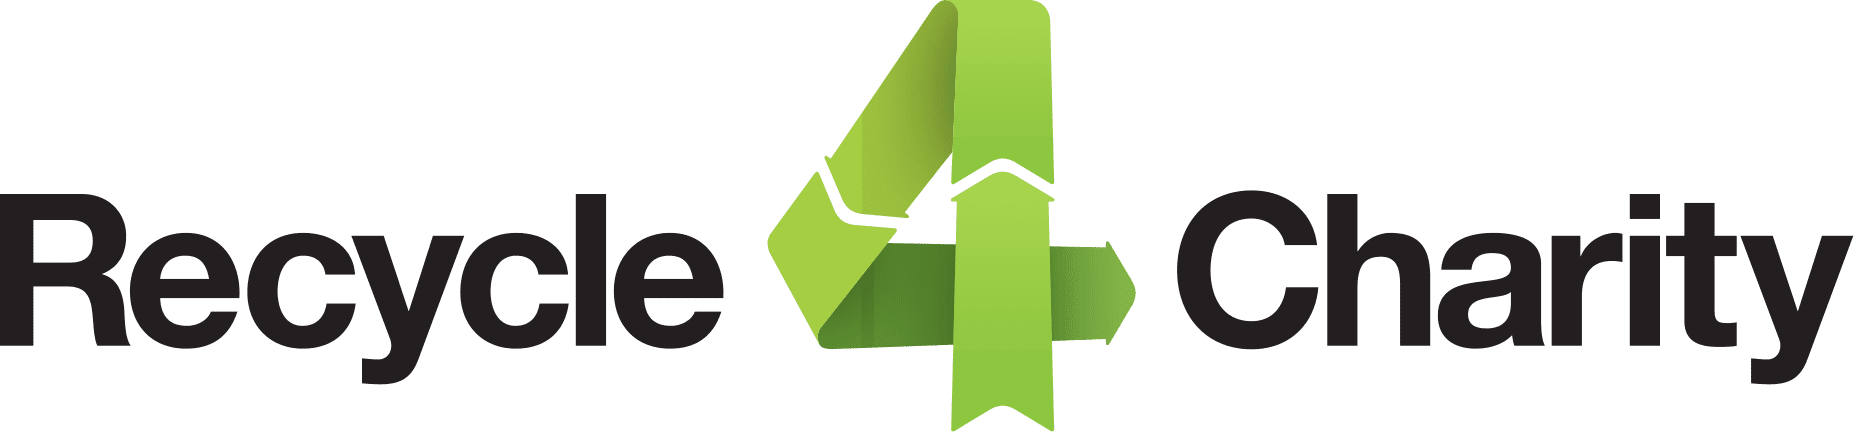 Recycle4Charity logo